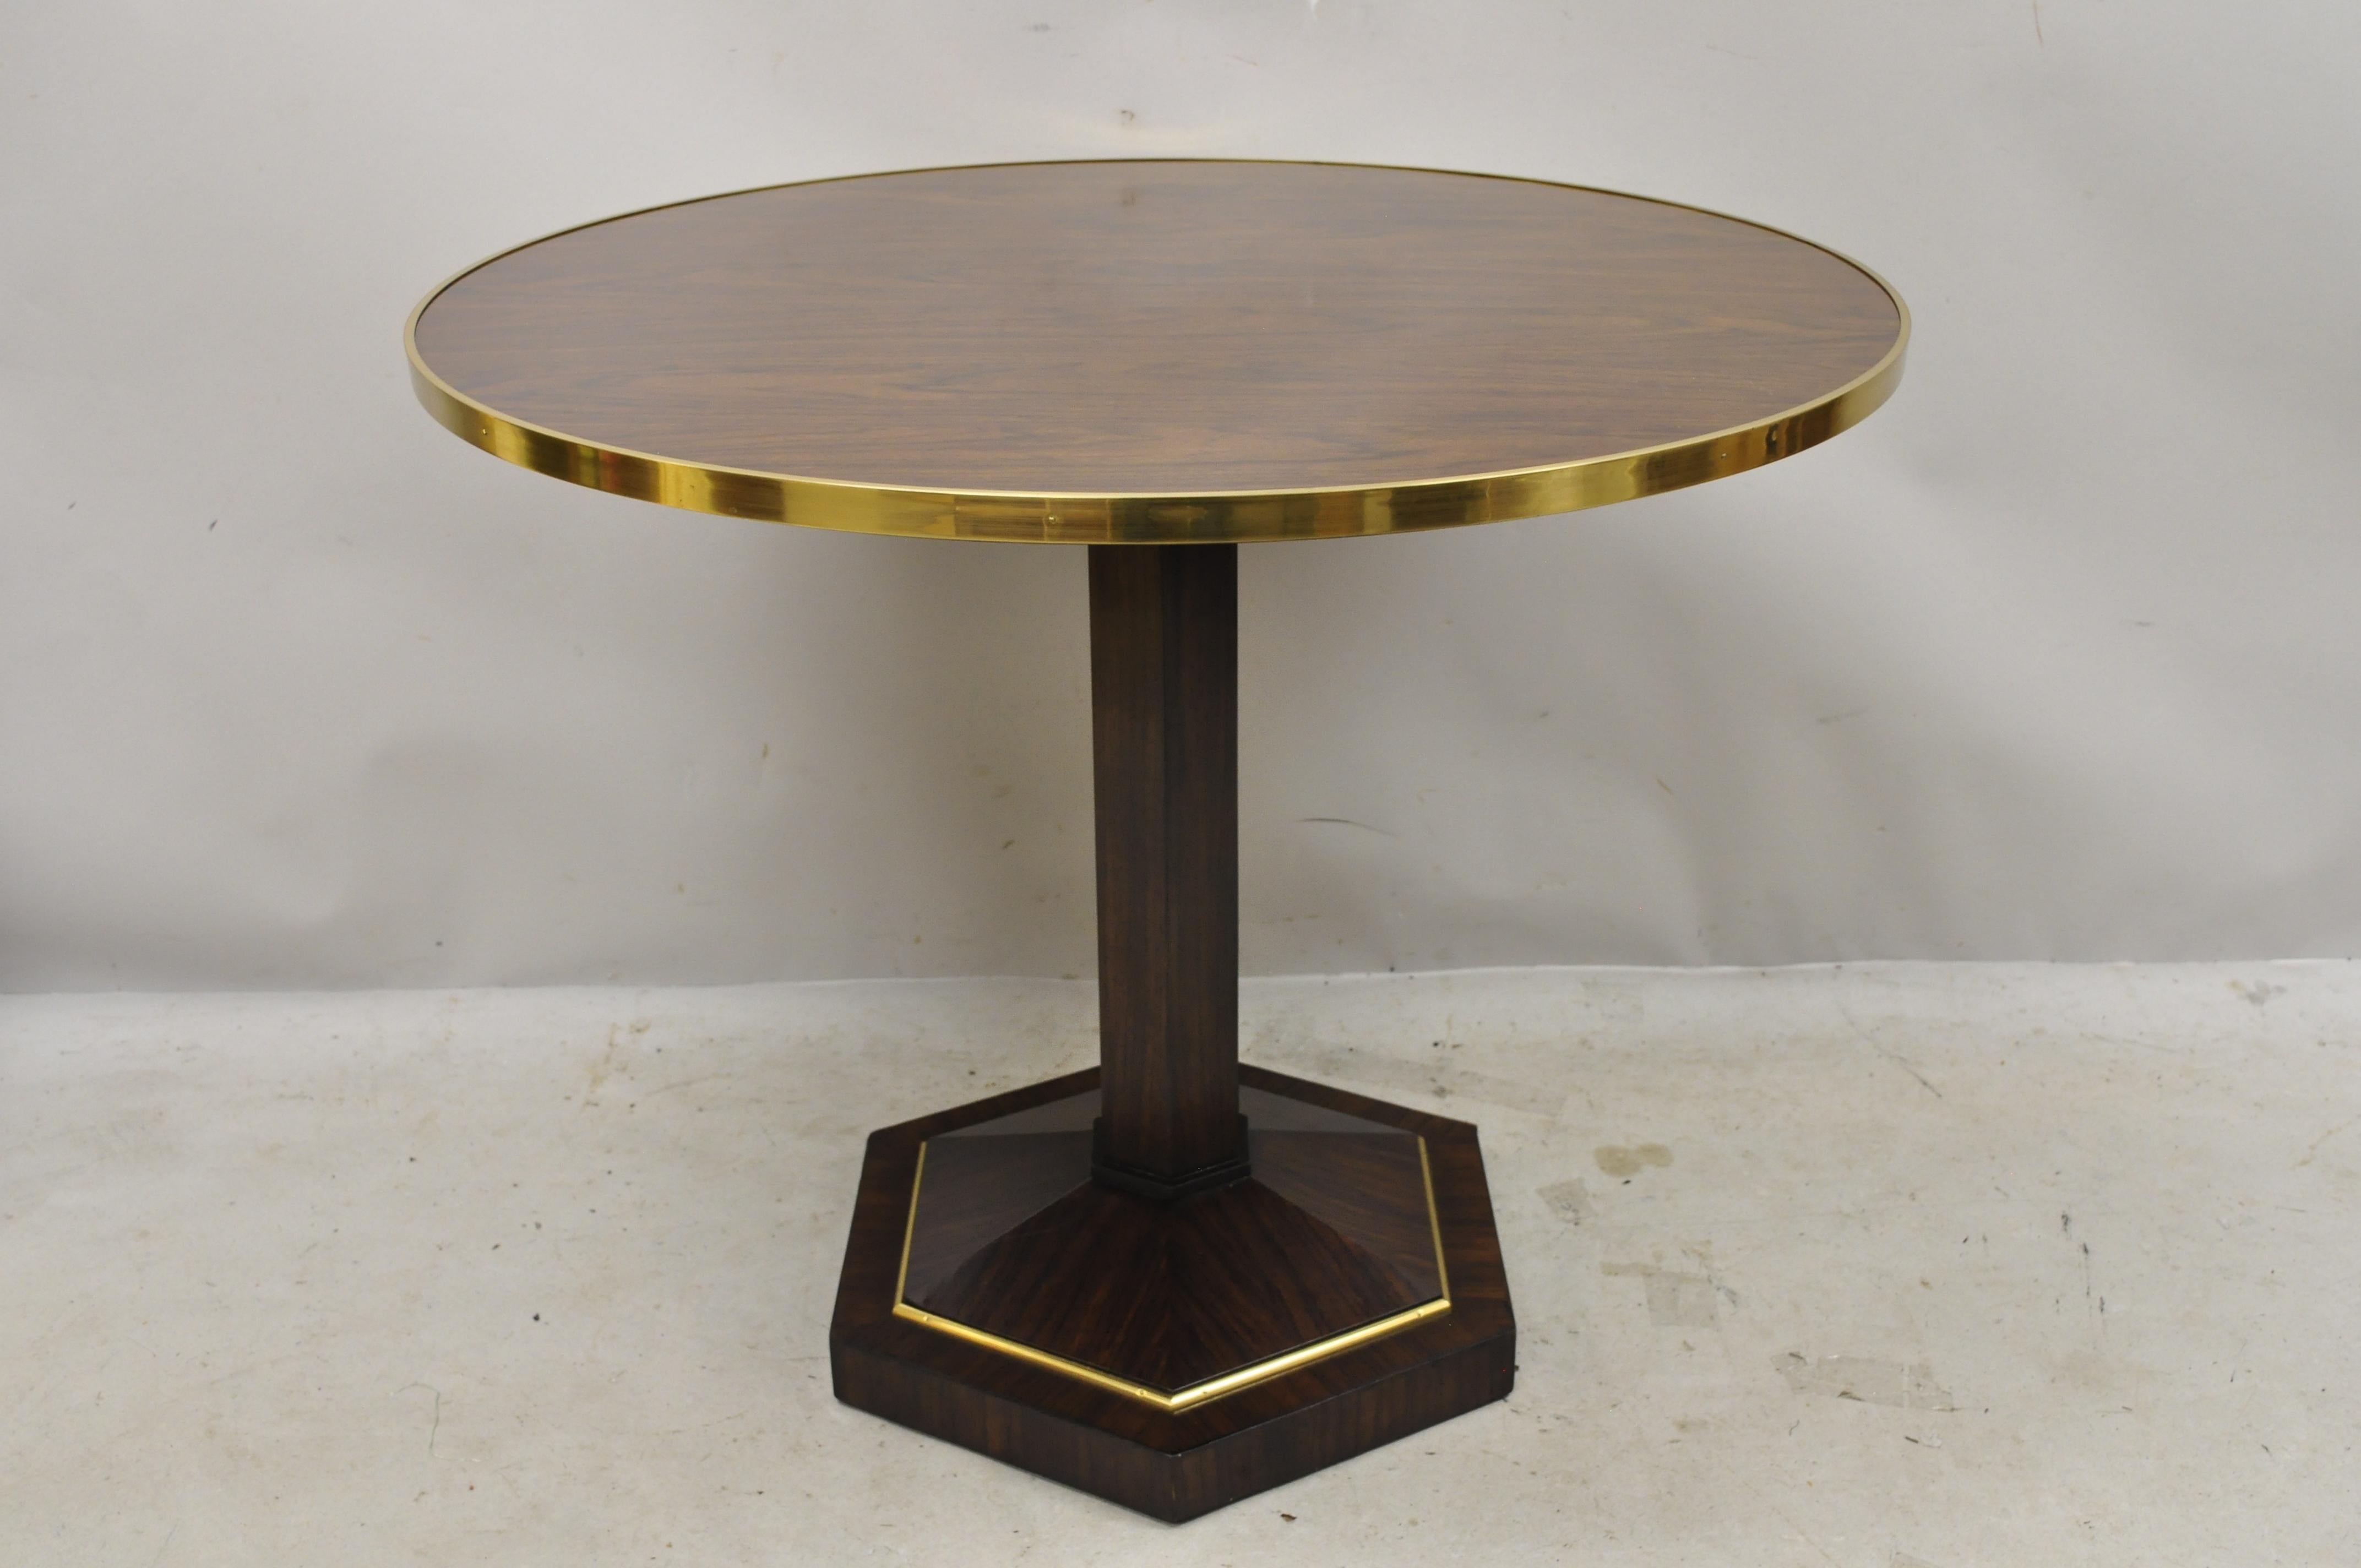 Maitland Smith French Empire zebra wood bronze band round pedestal base table. Item features bronze base/rim, pedestal base, beautiful wood grain, original label, quality craftsmanship, great style and form, circa late 20th century.
Measurements: